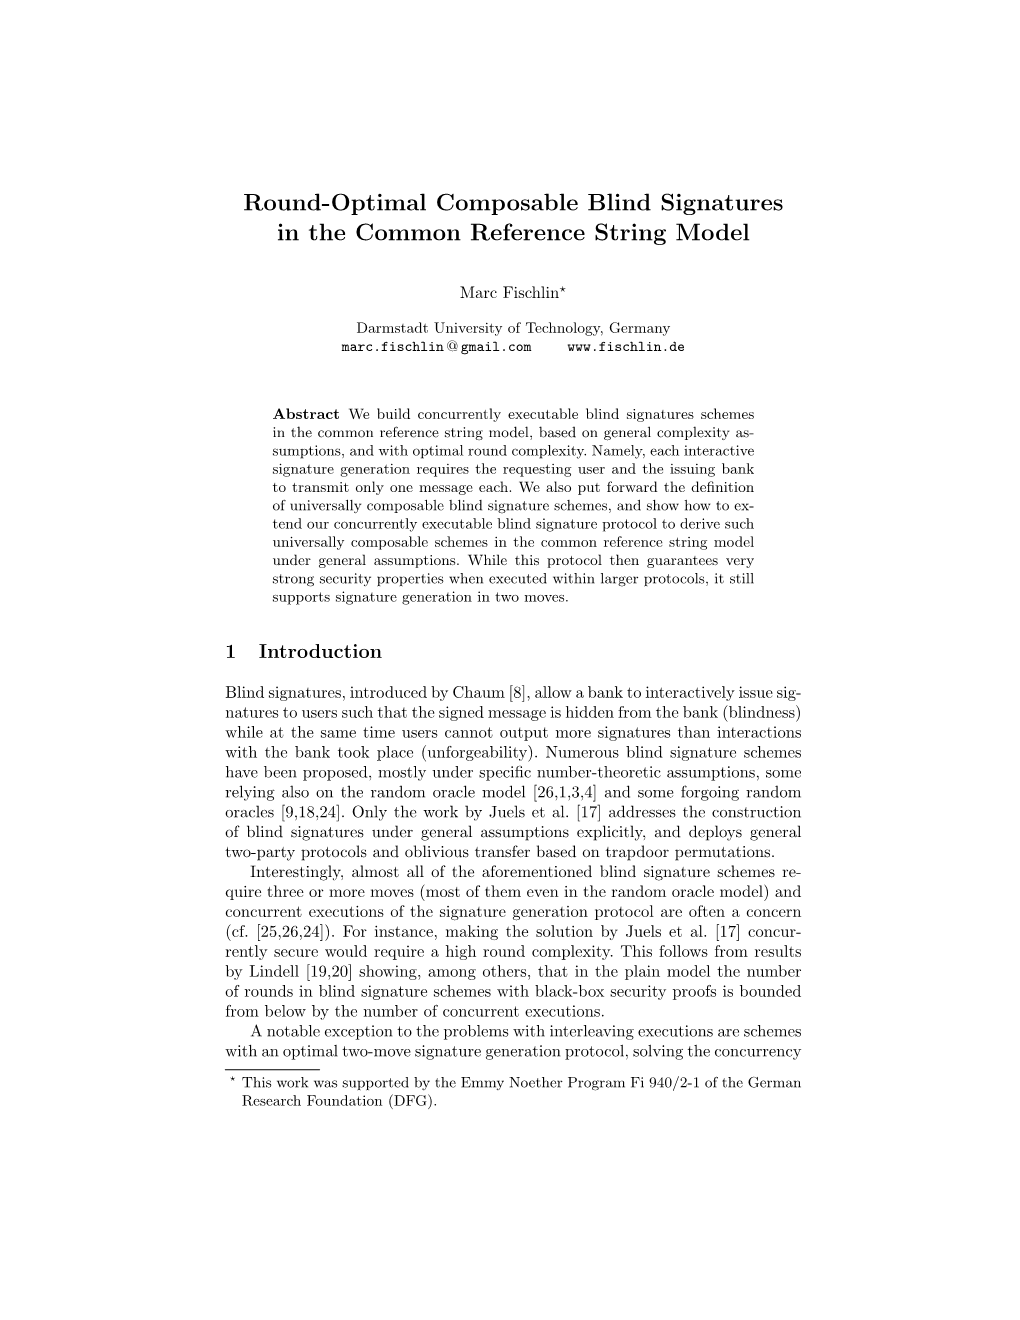 Round-Optimal Composable Blind Signatures in the Common Reference String Model